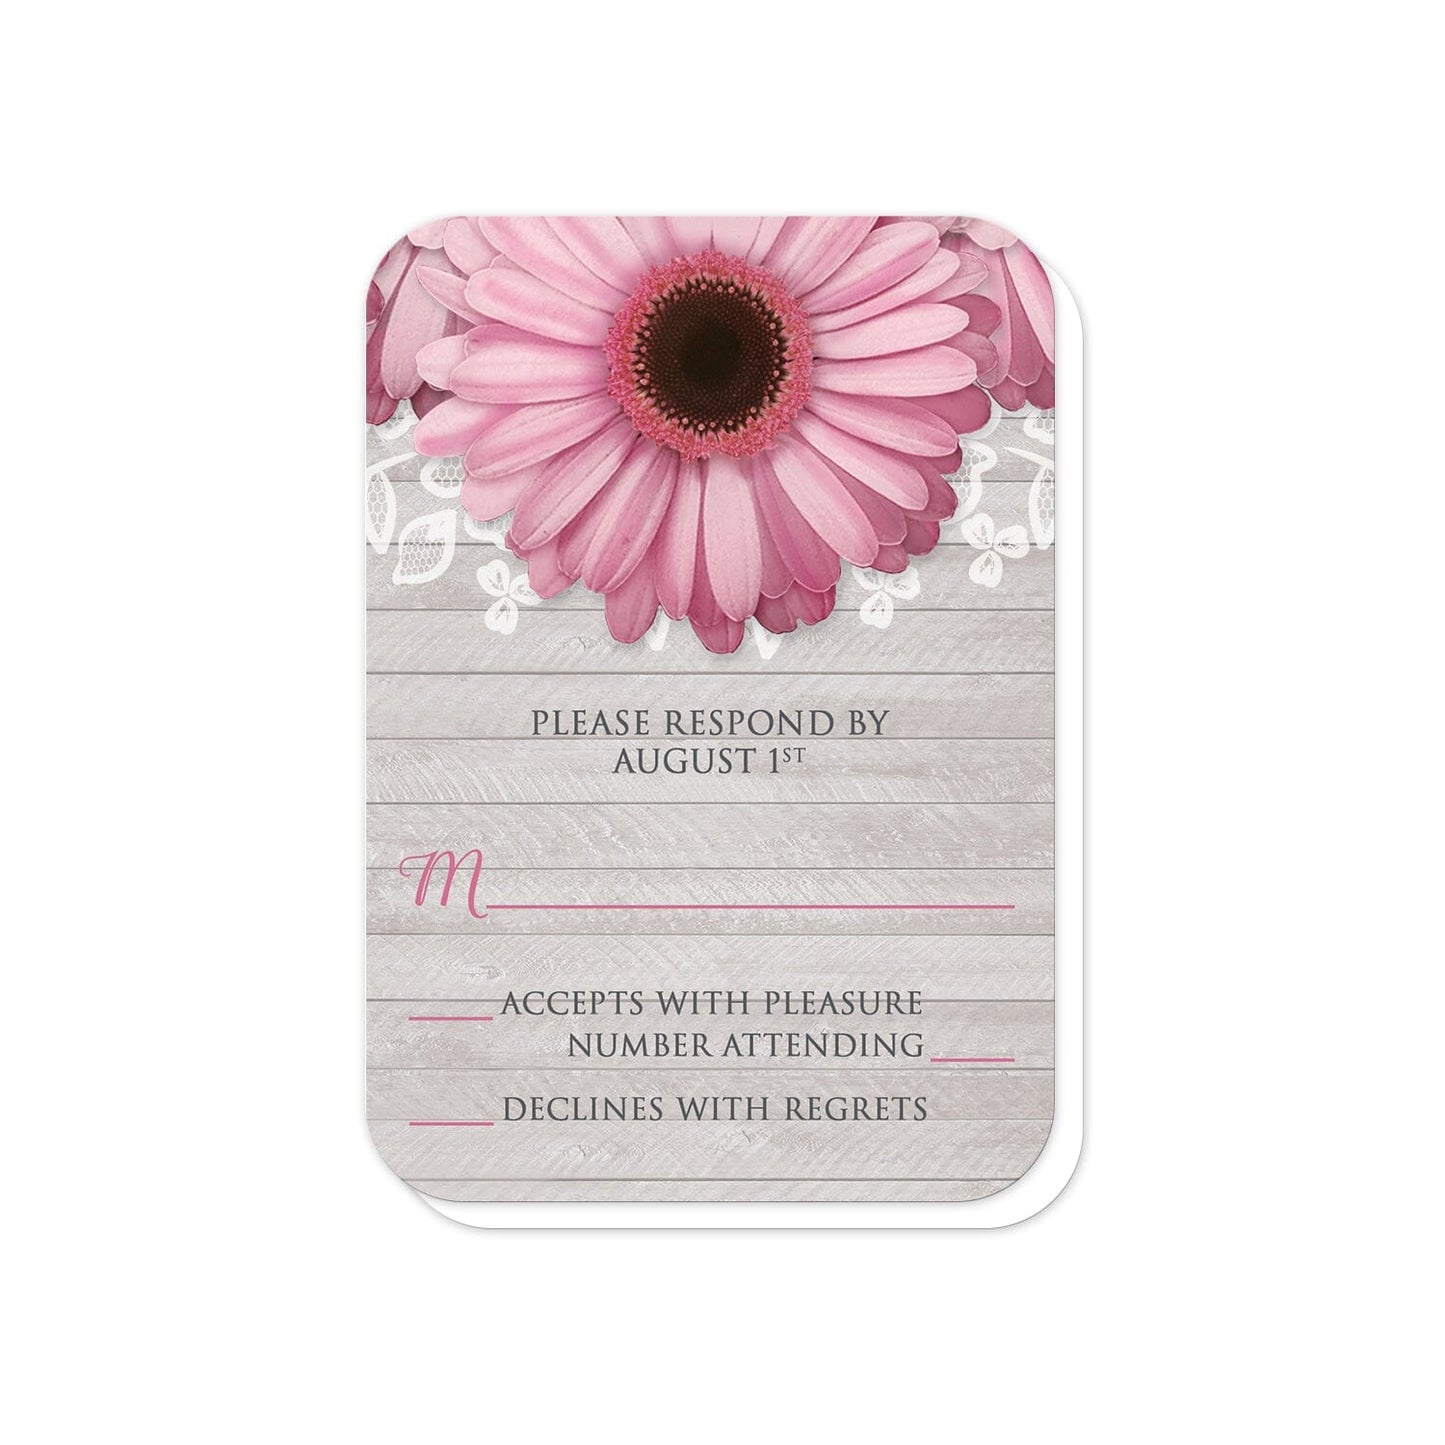 Rustic Pink Daisy Gray Wood RSVP Cards (with rounded corners) at Artistically Invited.